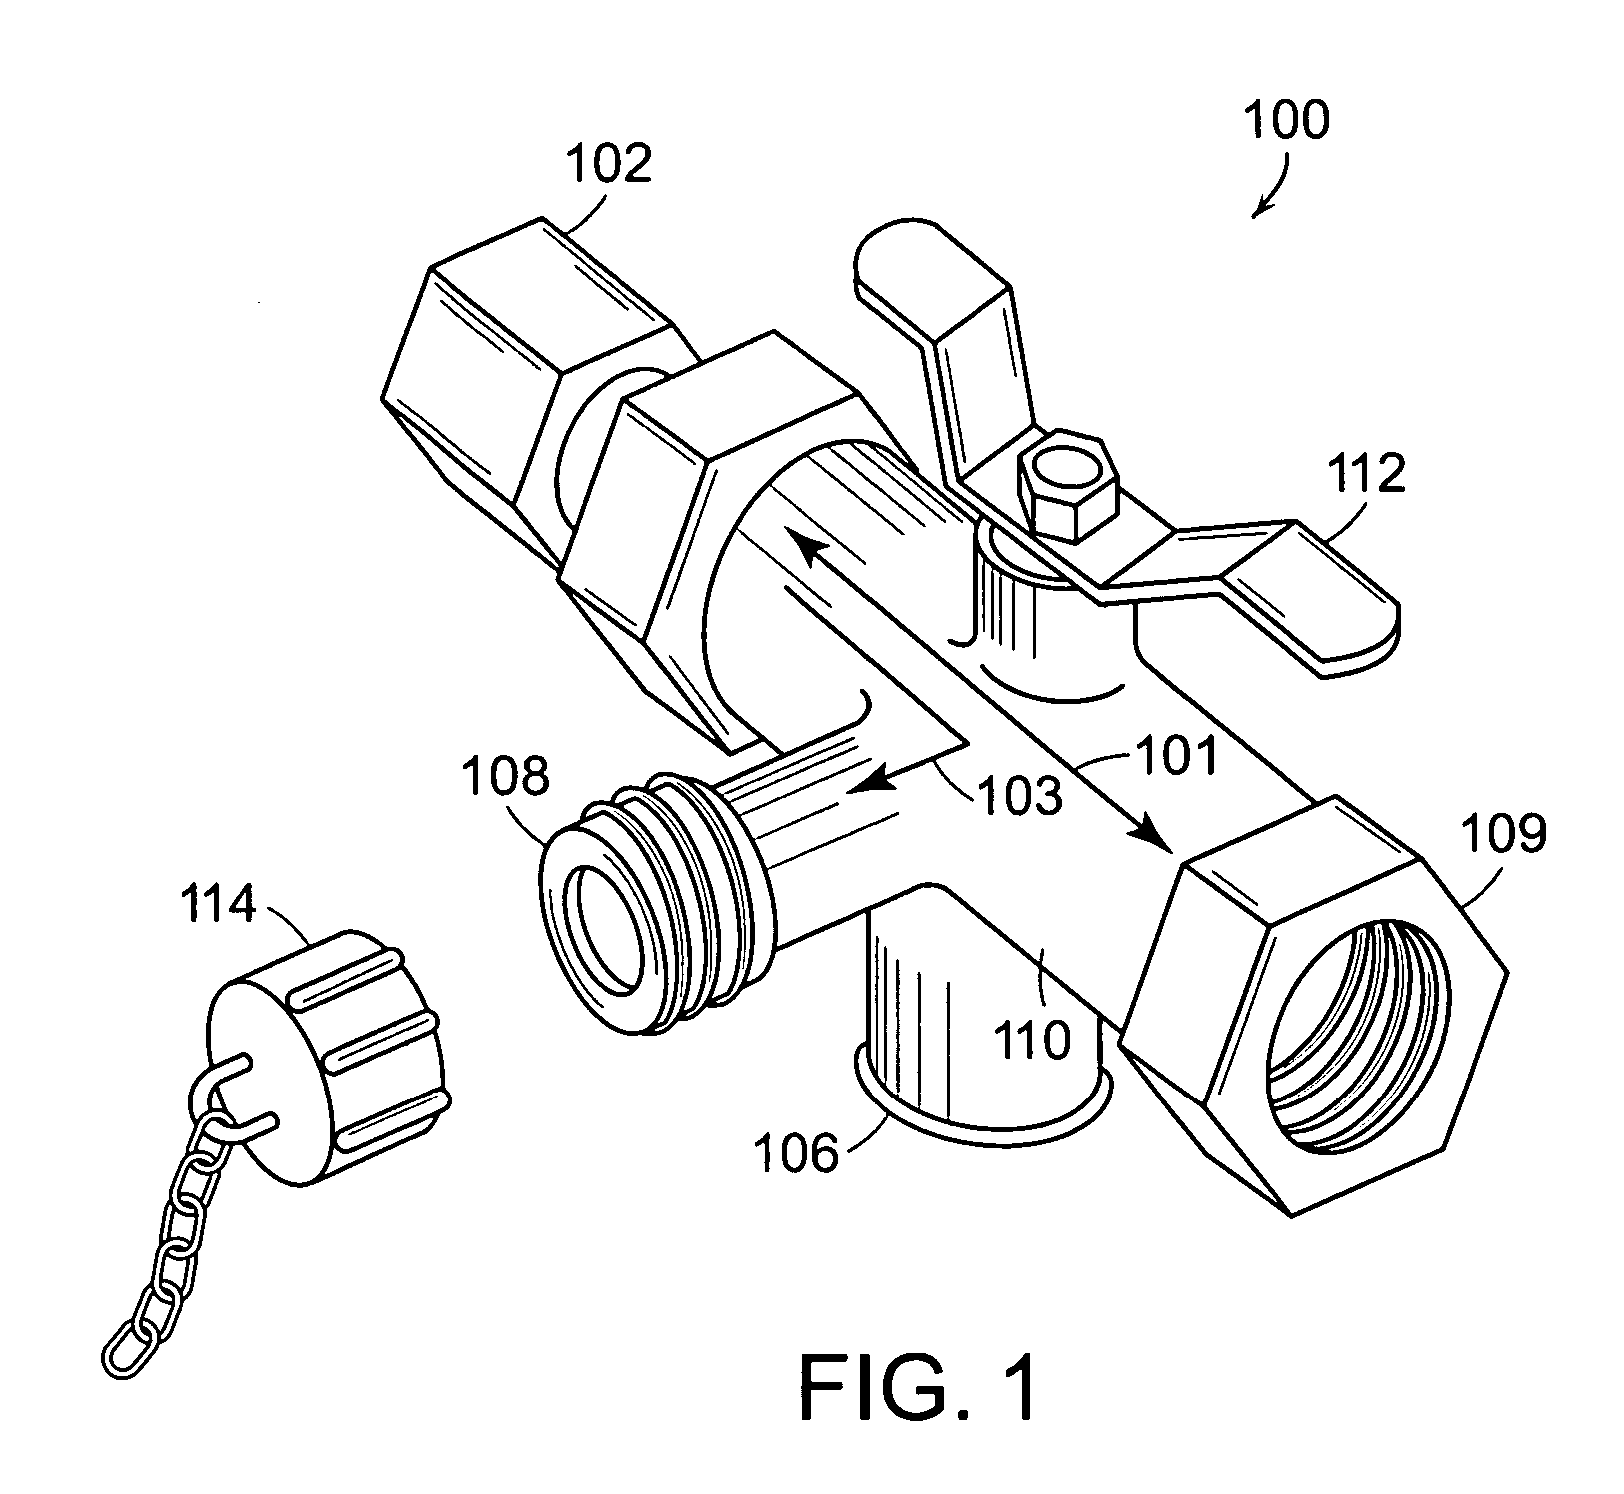 Isolation valve with integral pressure relief